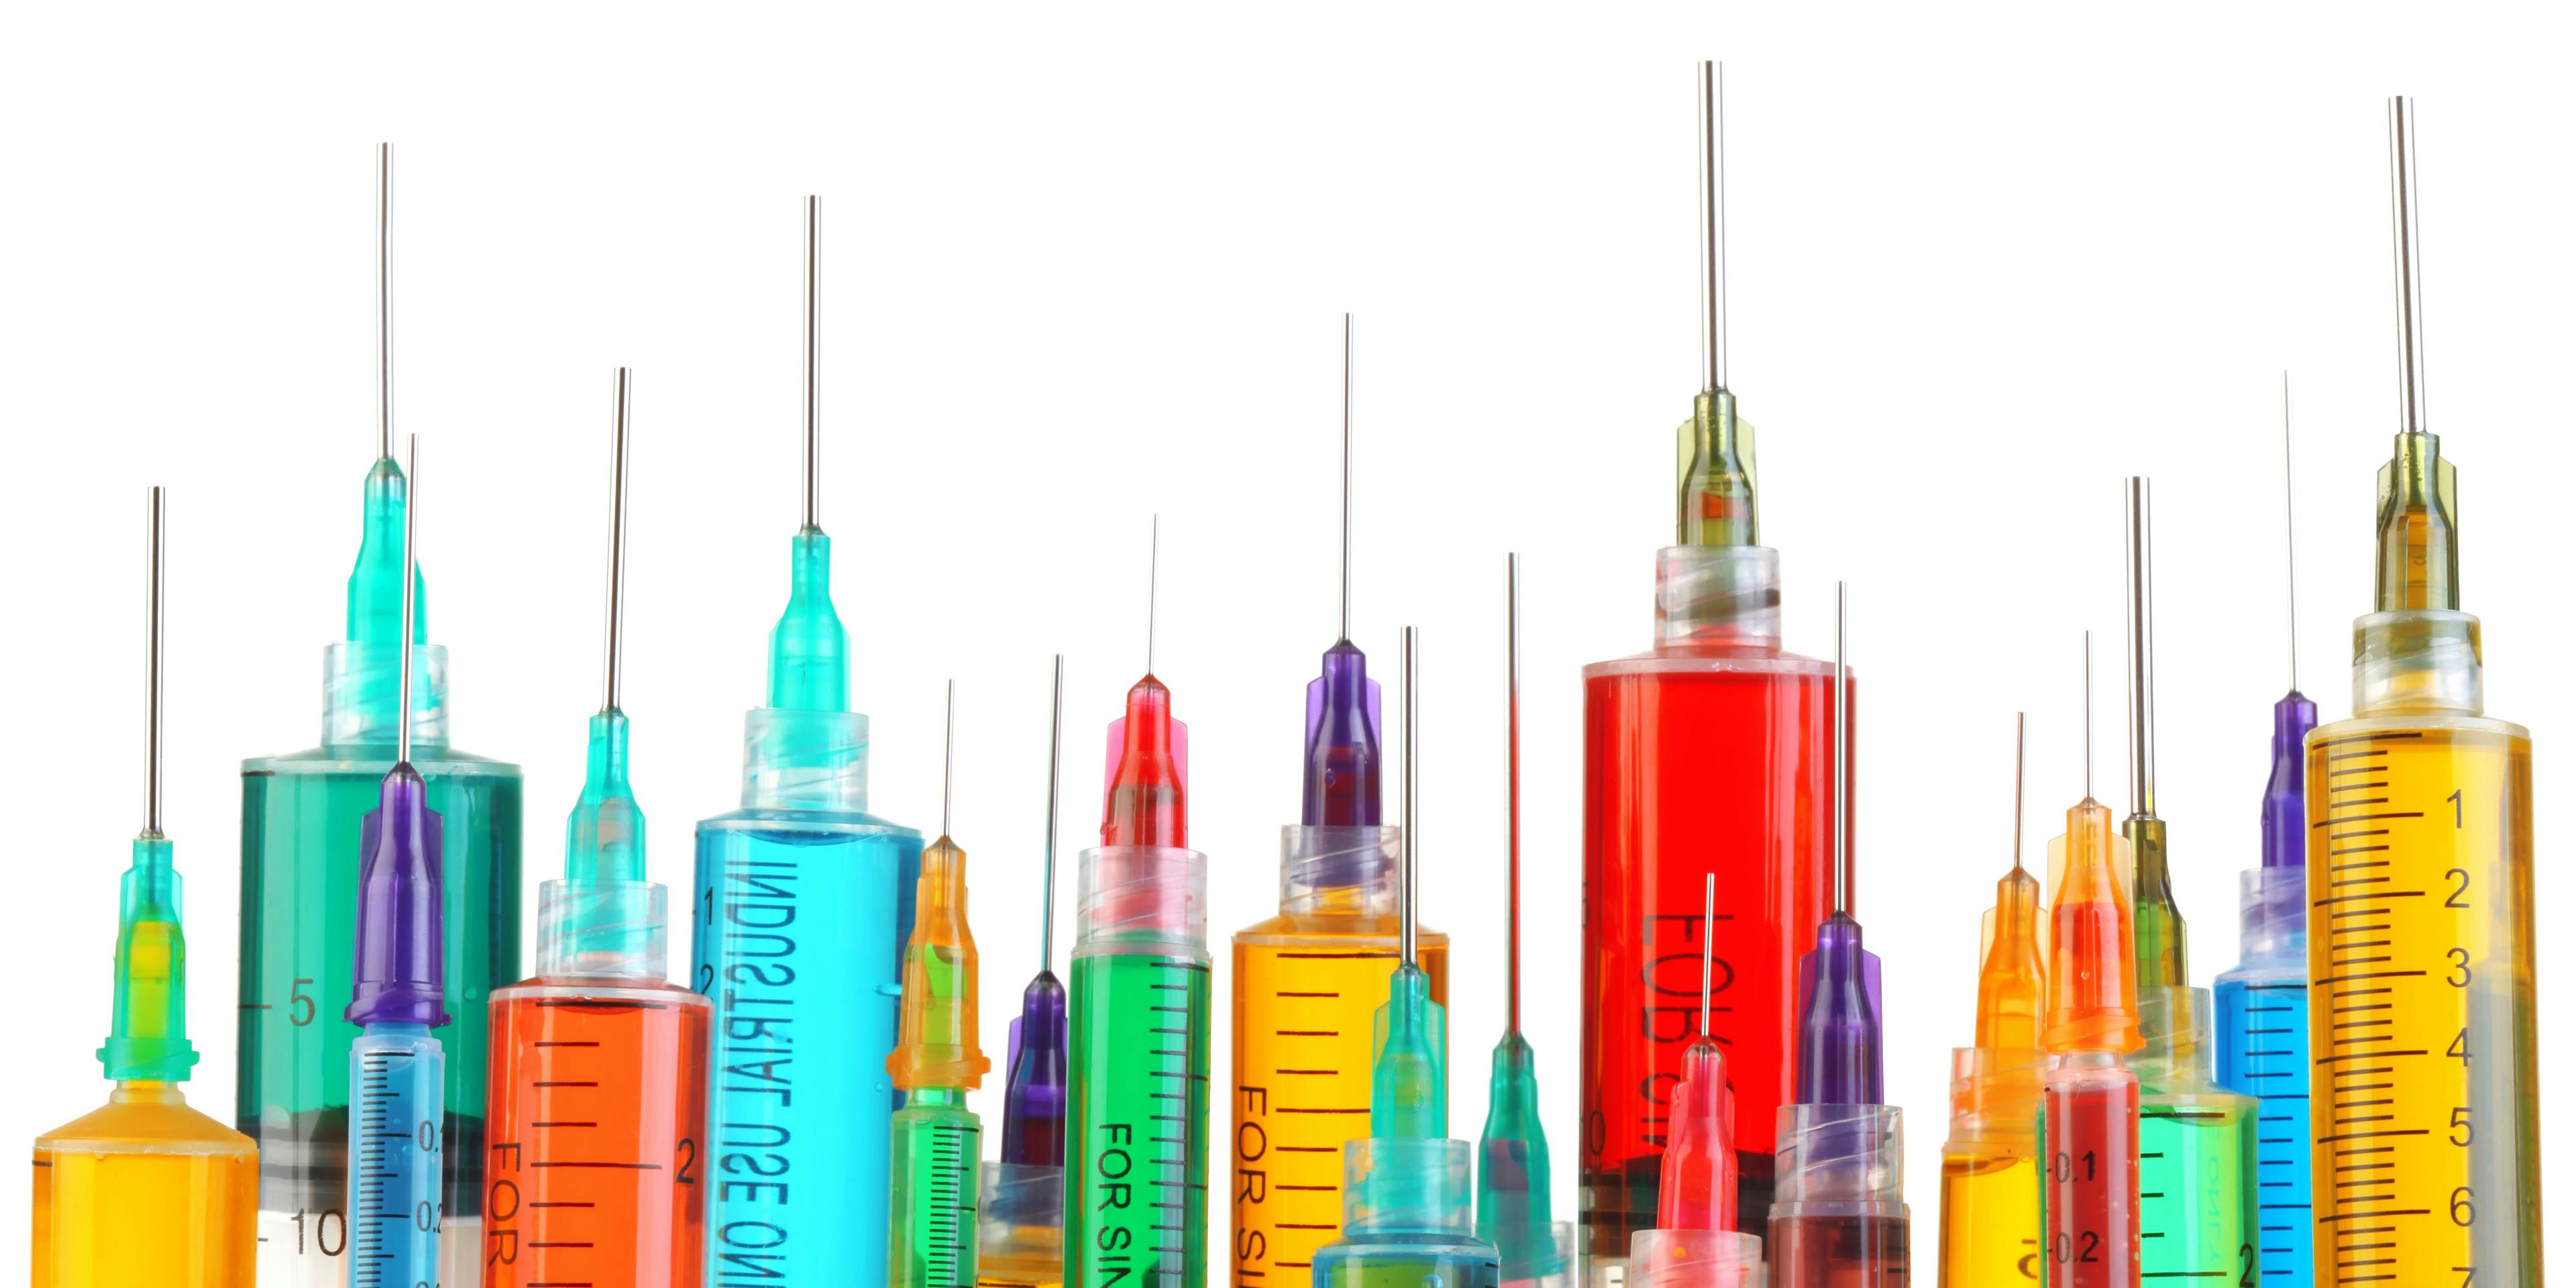 Be Aware of Age-Related Mix-Ups of COVID-19 Vaccines